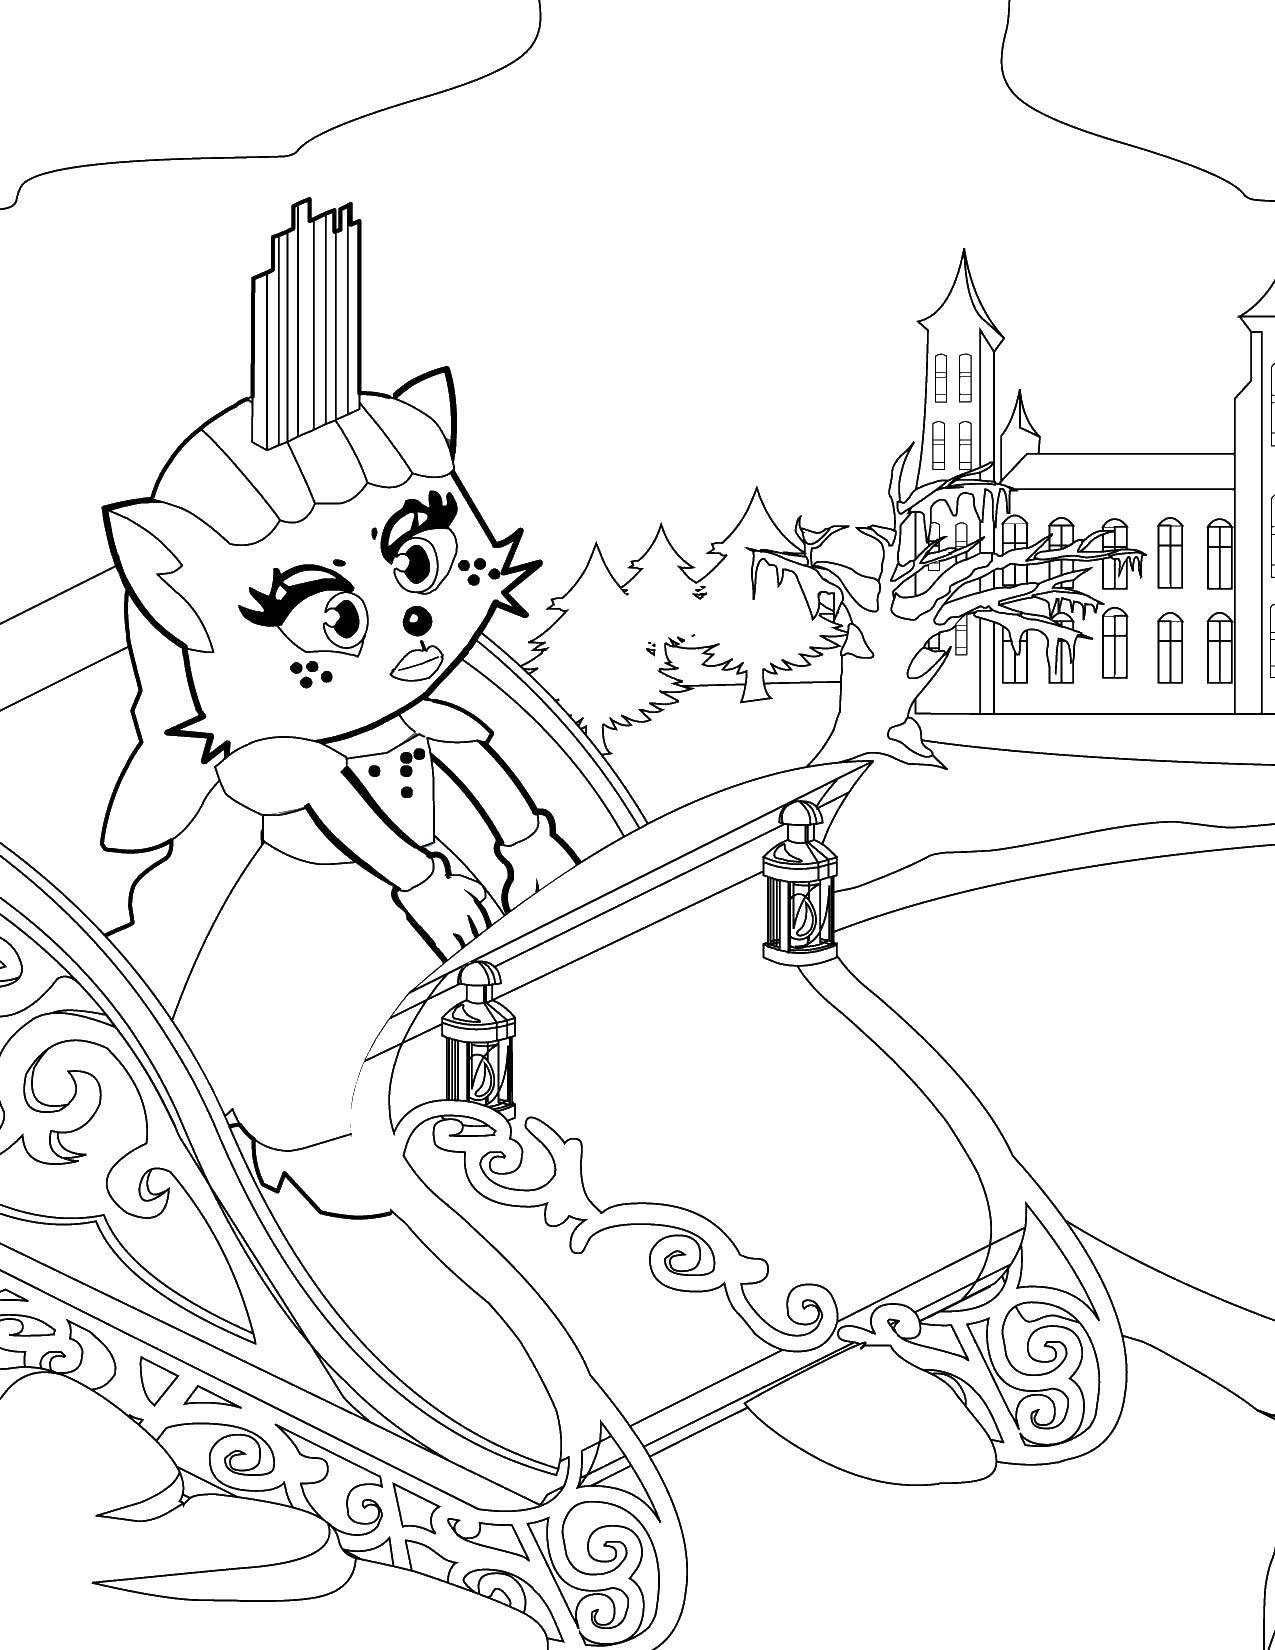 Coloring Kitty in a carriage. Category The cat. Tags:  cat, coach.